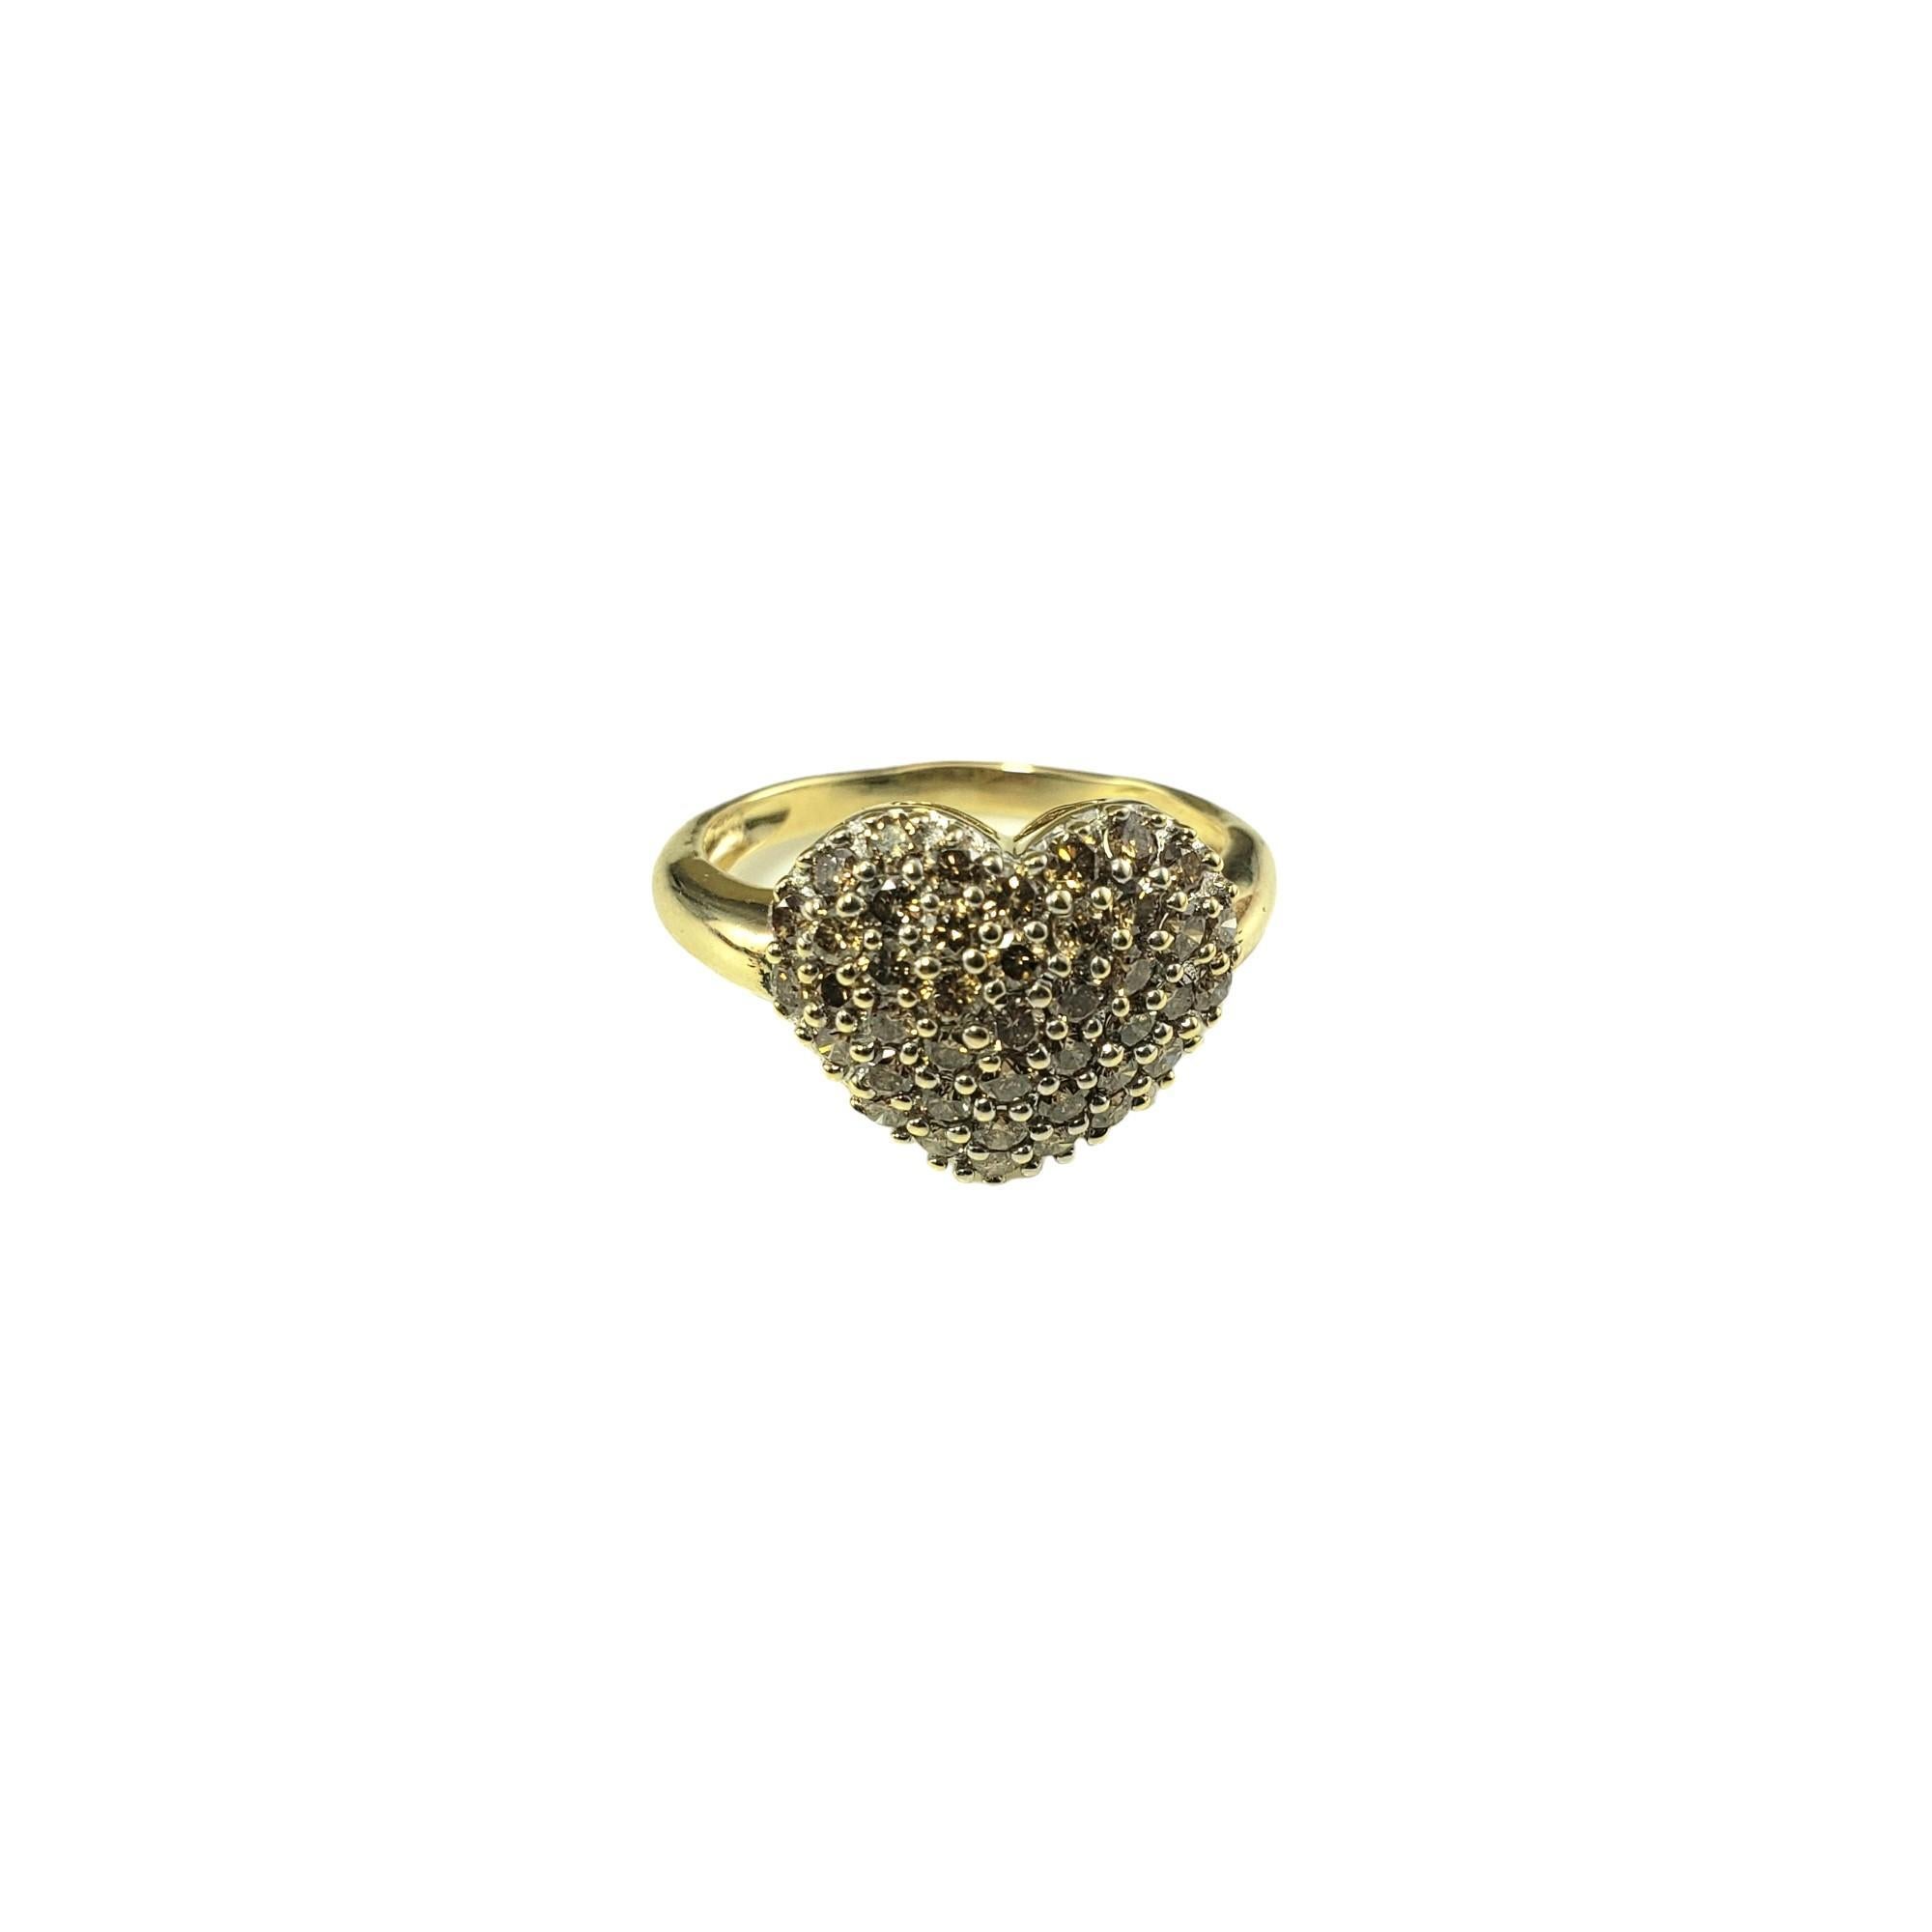 Vintage 14K Yellow Gold Diamond Heart Ring Size 7-

This lovely ring 42 round champagne cut diamonds set in classic 14K yellow gold.  Width: 13 mm.  
Shank: 2 mm.

Approximate total diamond weight: .84 ct.

Diamond color: champagne

Diamond clarity: